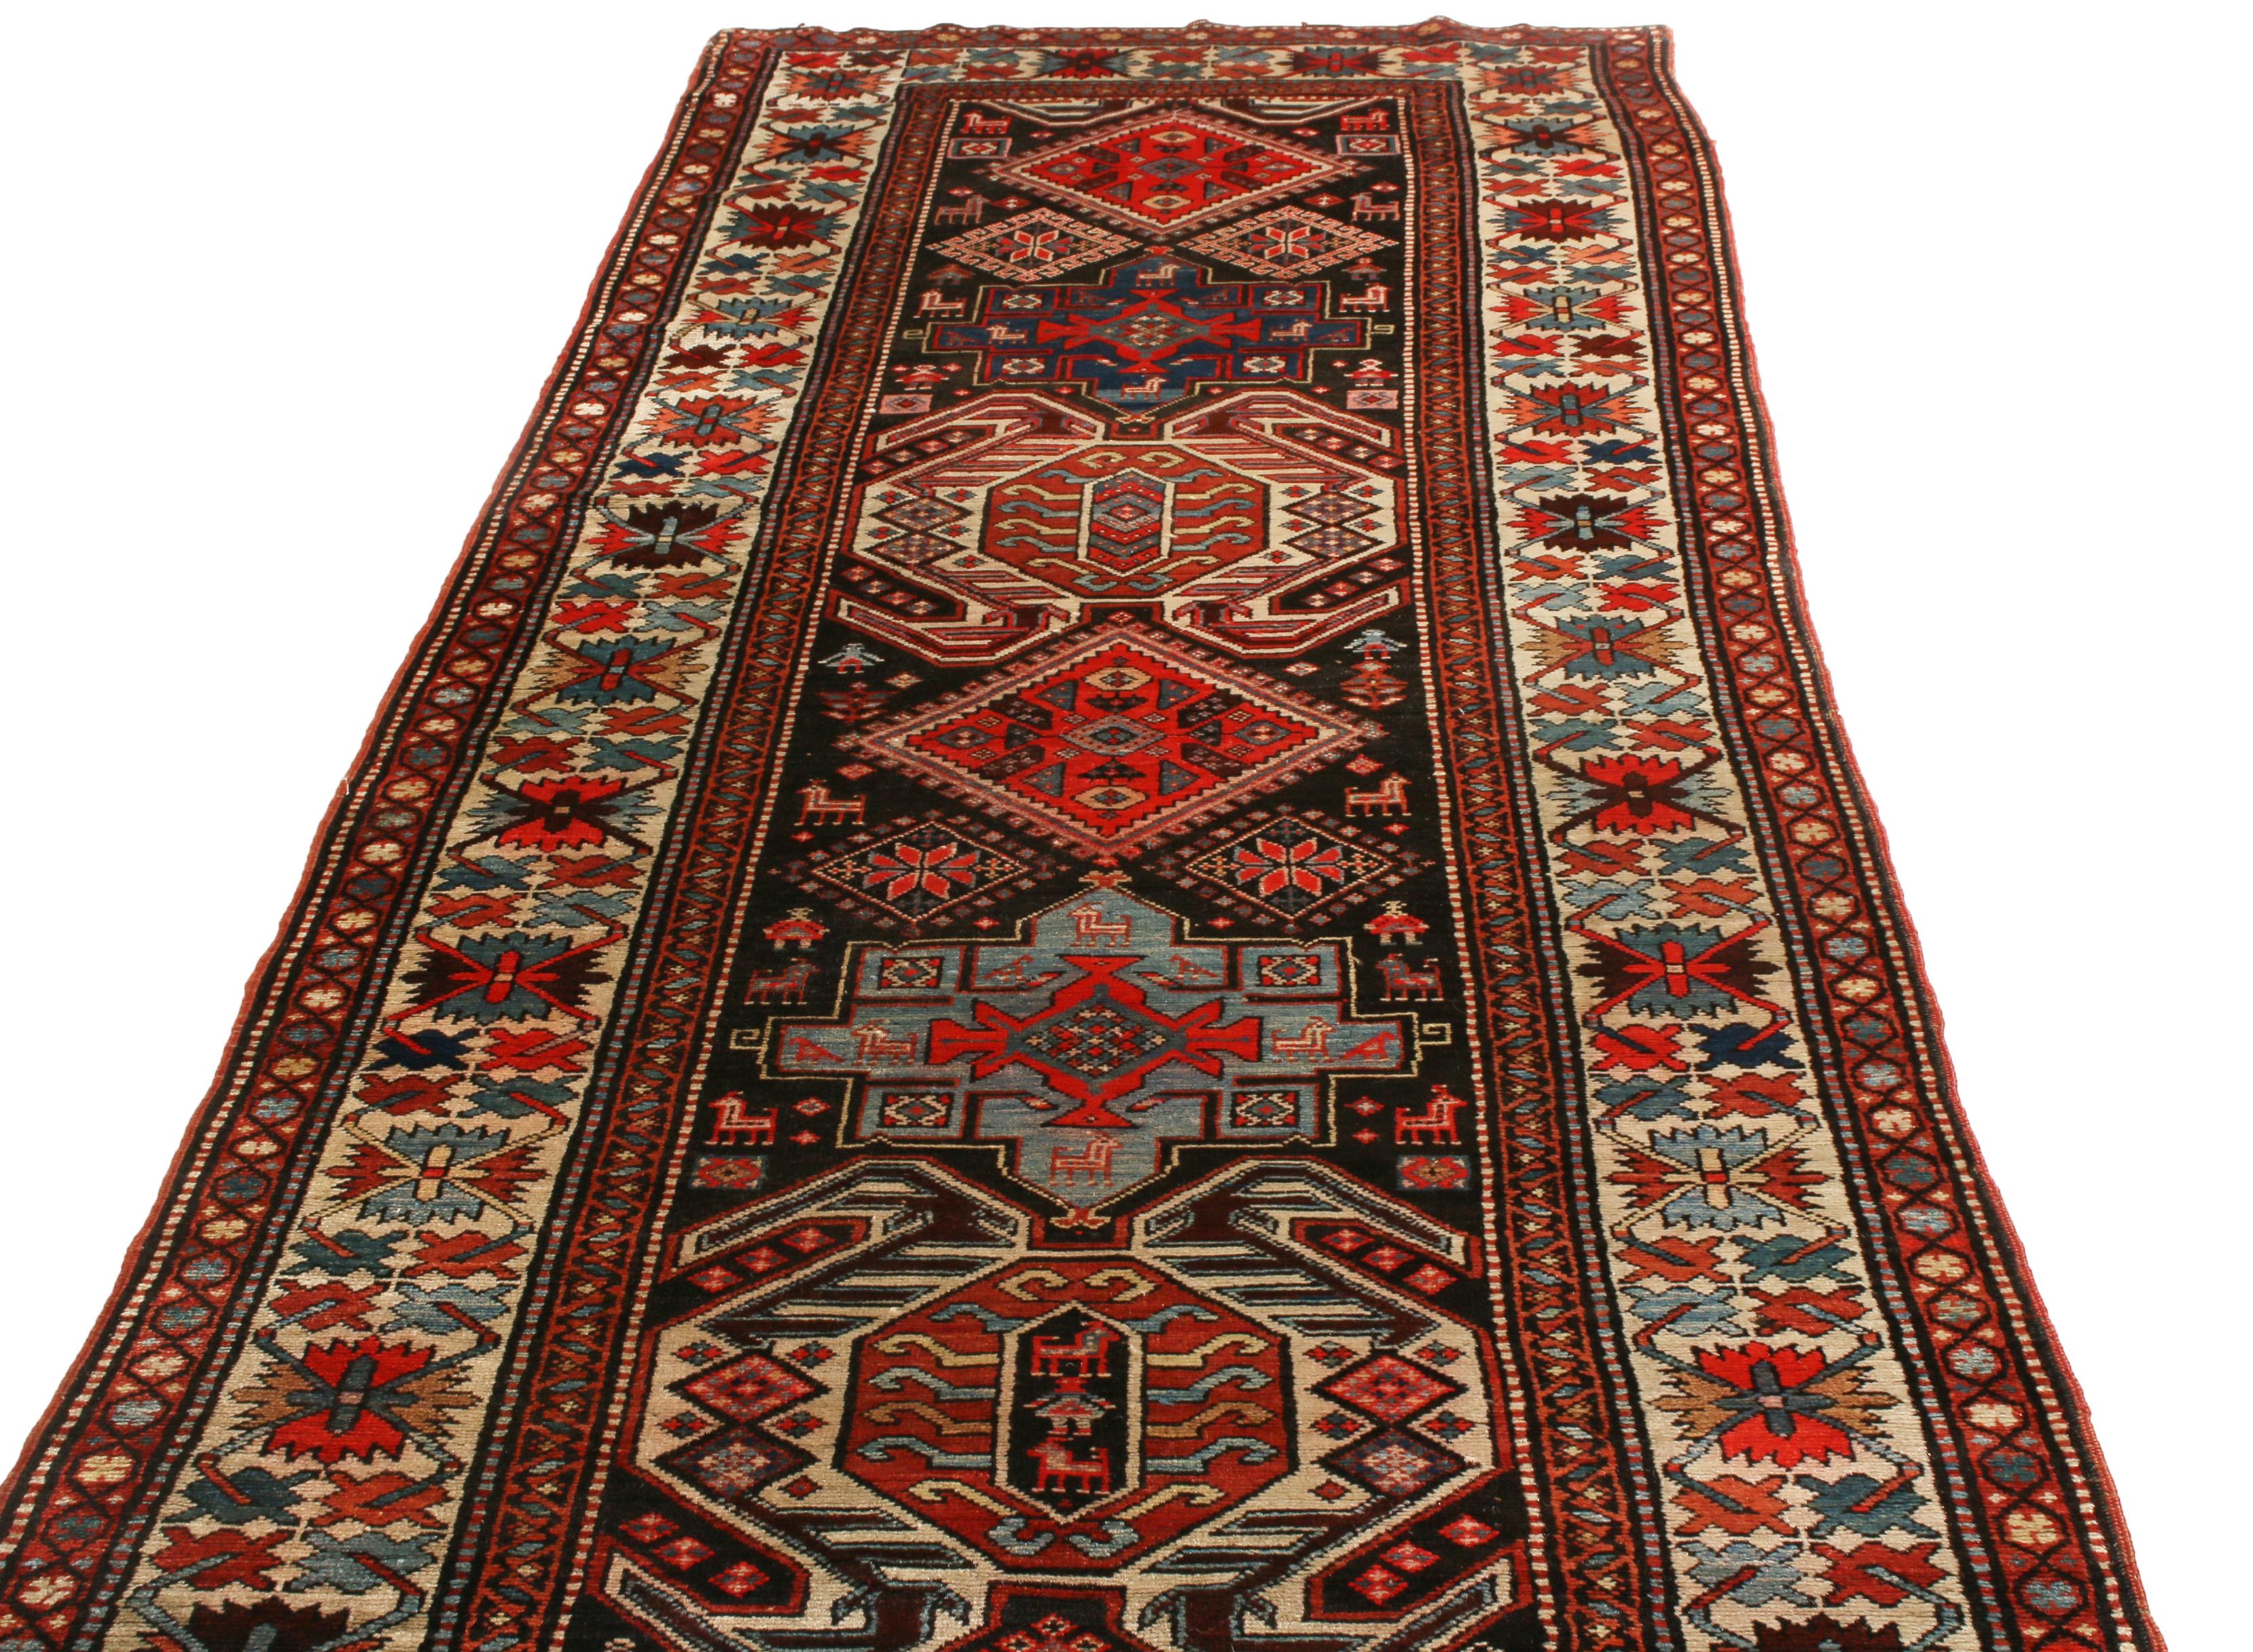 Originating from Russia between 1890-1900, this antique geometric rug featuring a Lankeran design, complemented by symbolic crab, human, and canine motifs among its varied symbols in rich burgundy red, black, and beige colorways. Hand knotted in